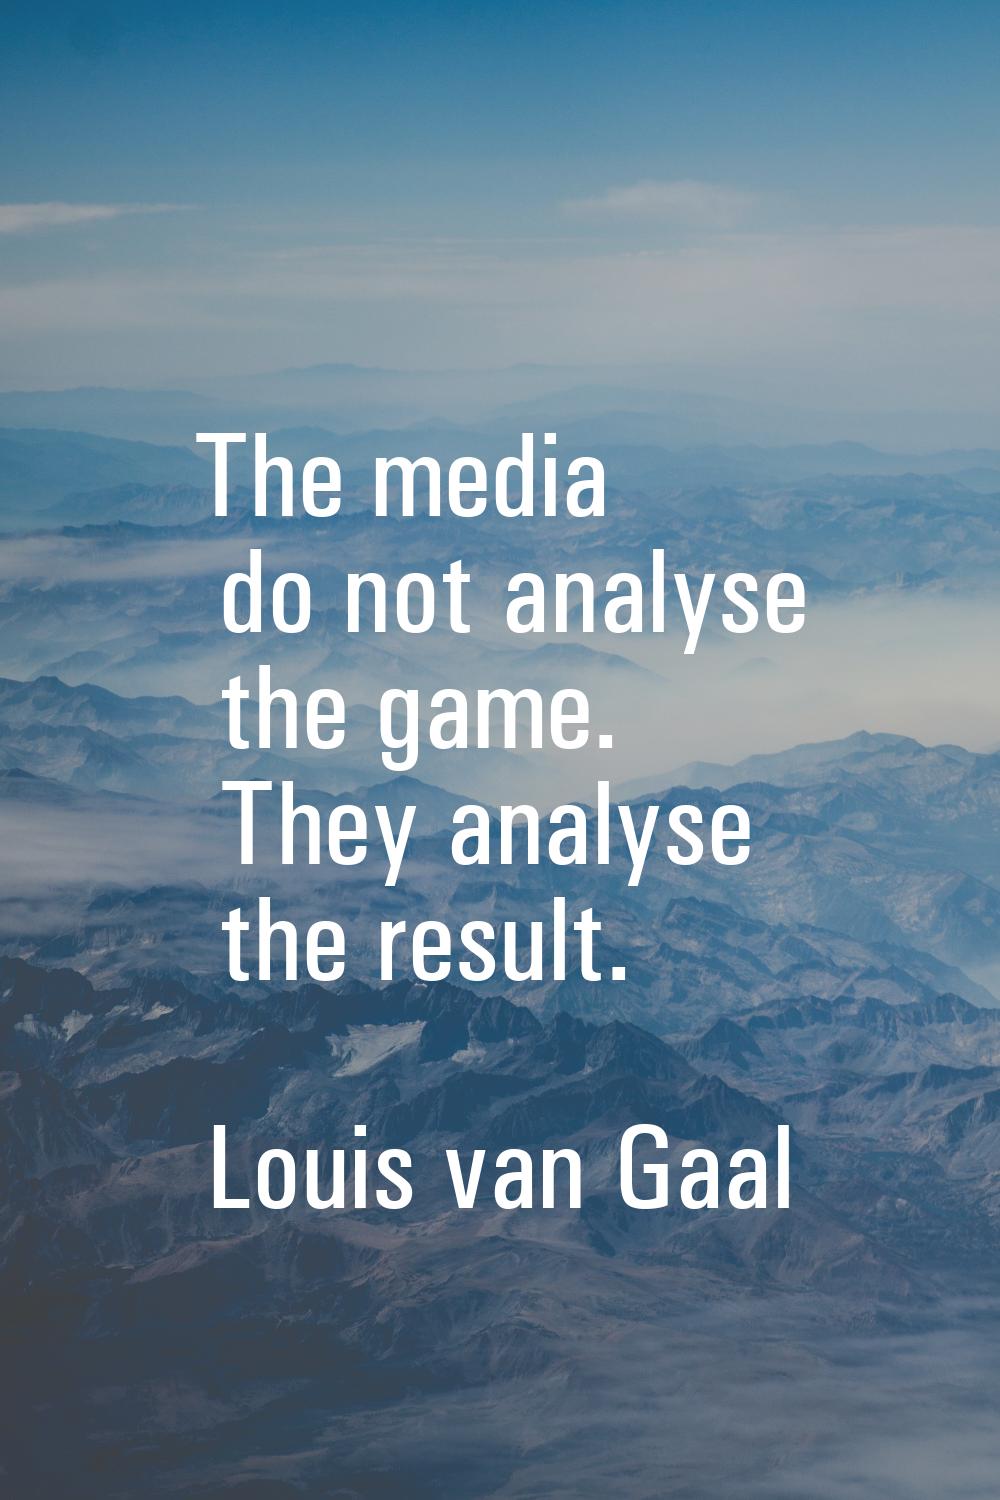 The media do not analyse the game. They analyse the result.